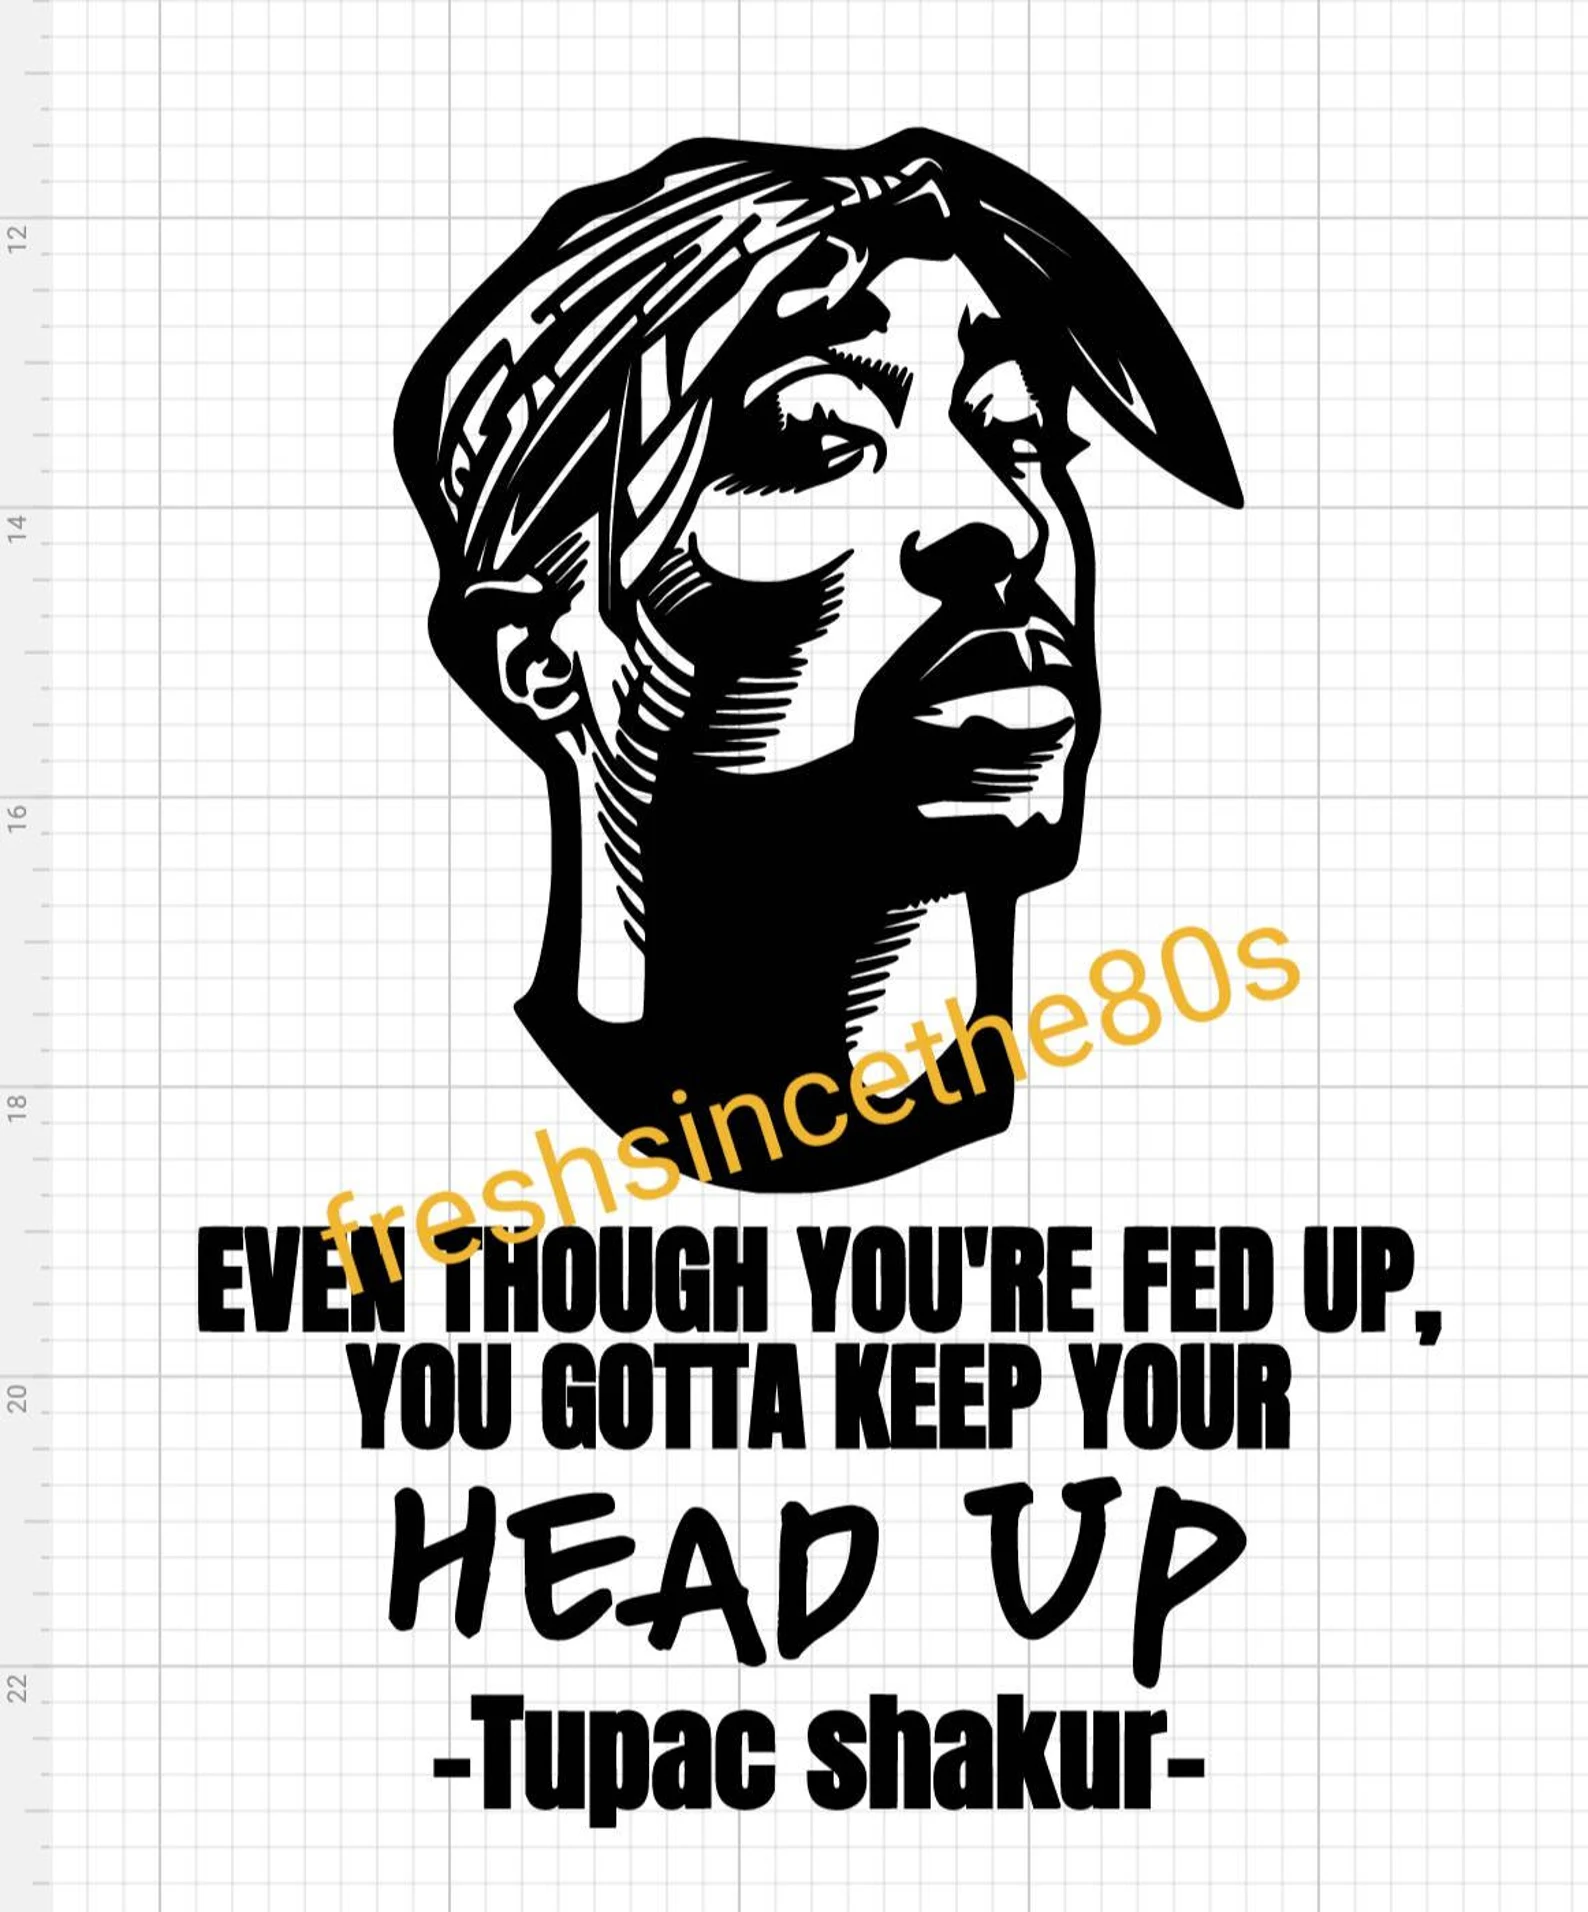 Classic Tupac photo for poster.